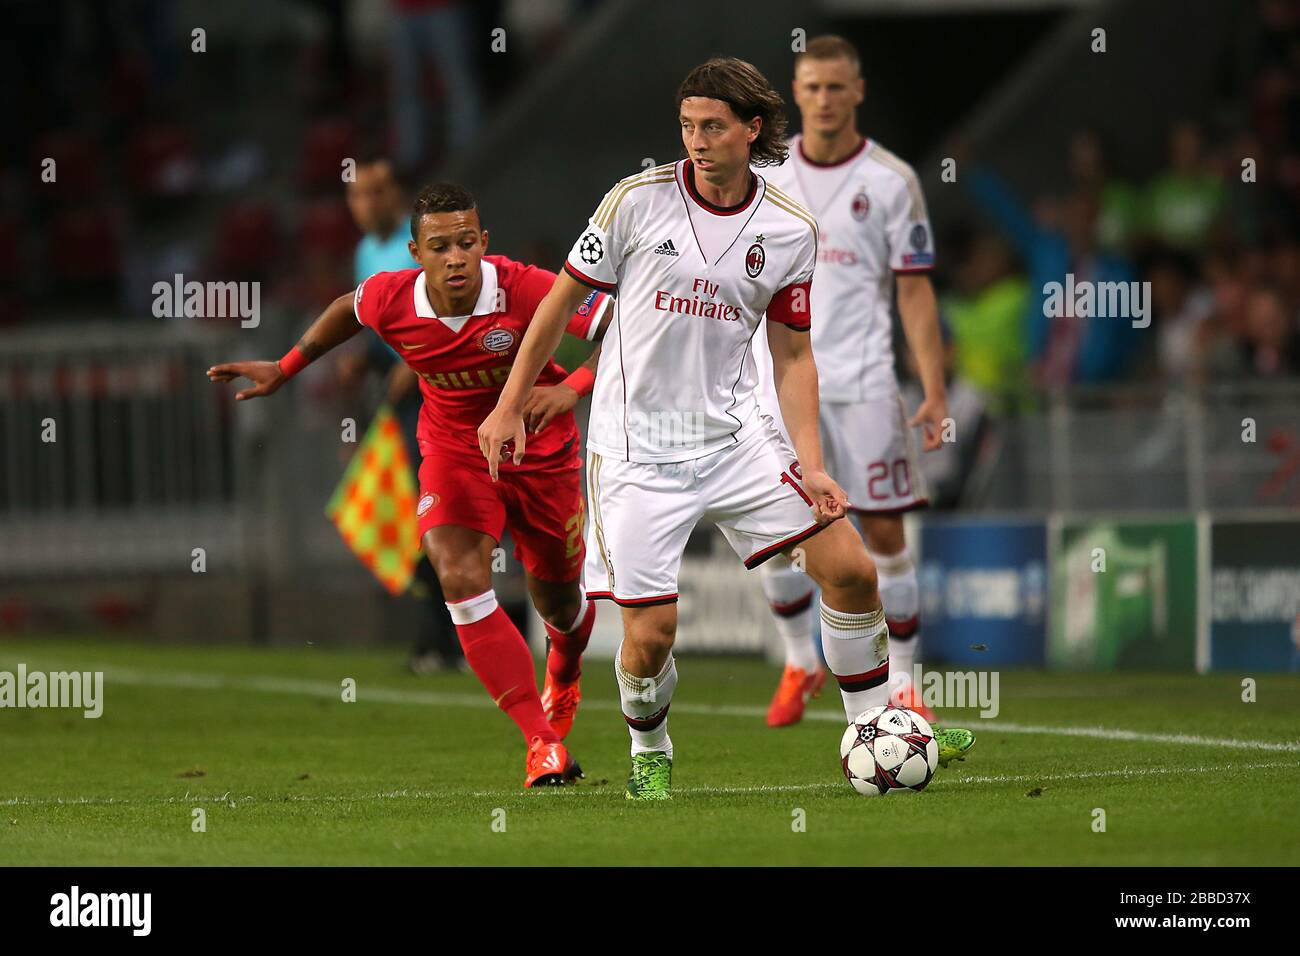 (Left to Right) PSV Eindhoven's Memphis Depay and AC Milan's Riccardo Montolivo battle for the ball. Stock Photo